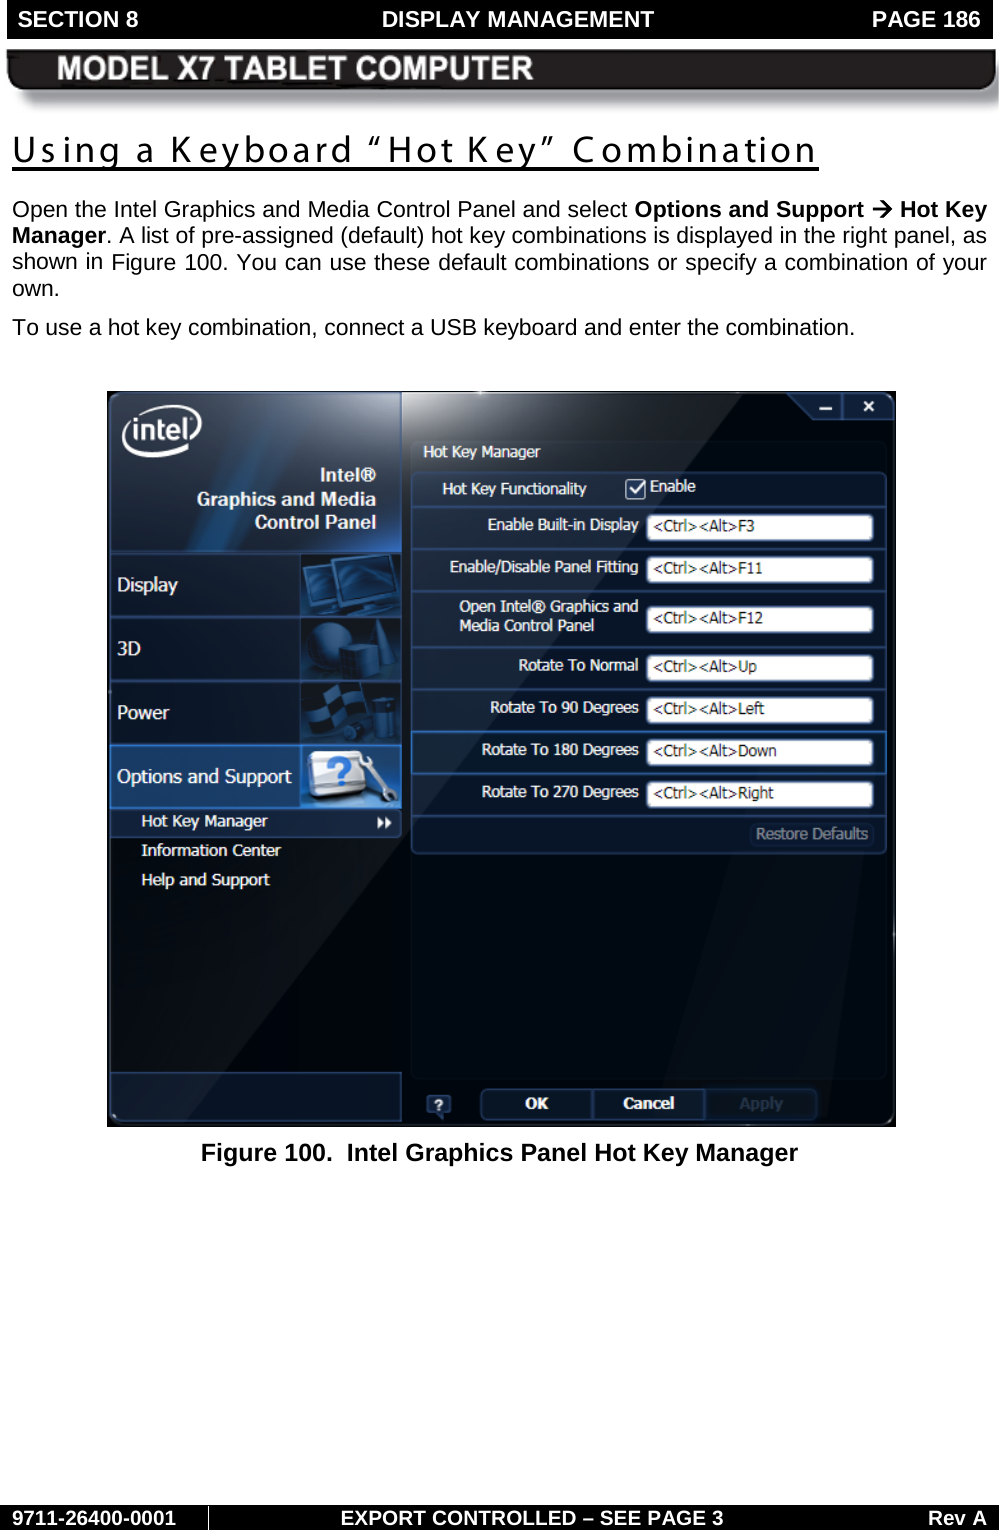 SECTION 8  DISPLAY MANAGEMENT  PAGE 186        9711-26400-0001 EXPORT CONTROLLED – SEE PAGE 3 Rev A Us ing a K eyboard “Hot K ey” Combination Open the Intel Graphics and Media Control Panel and select Options and Support à Hot Key Manager. A list of pre-assigned (default) hot key combinations is displayed in the right panel, as shown in Figure 100. You can use these default combinations or specify a combination of your own.  To use a hot key combination, connect a USB keyboard and enter the combination.   Figure 100.  Intel Graphics Panel Hot Key Manager  